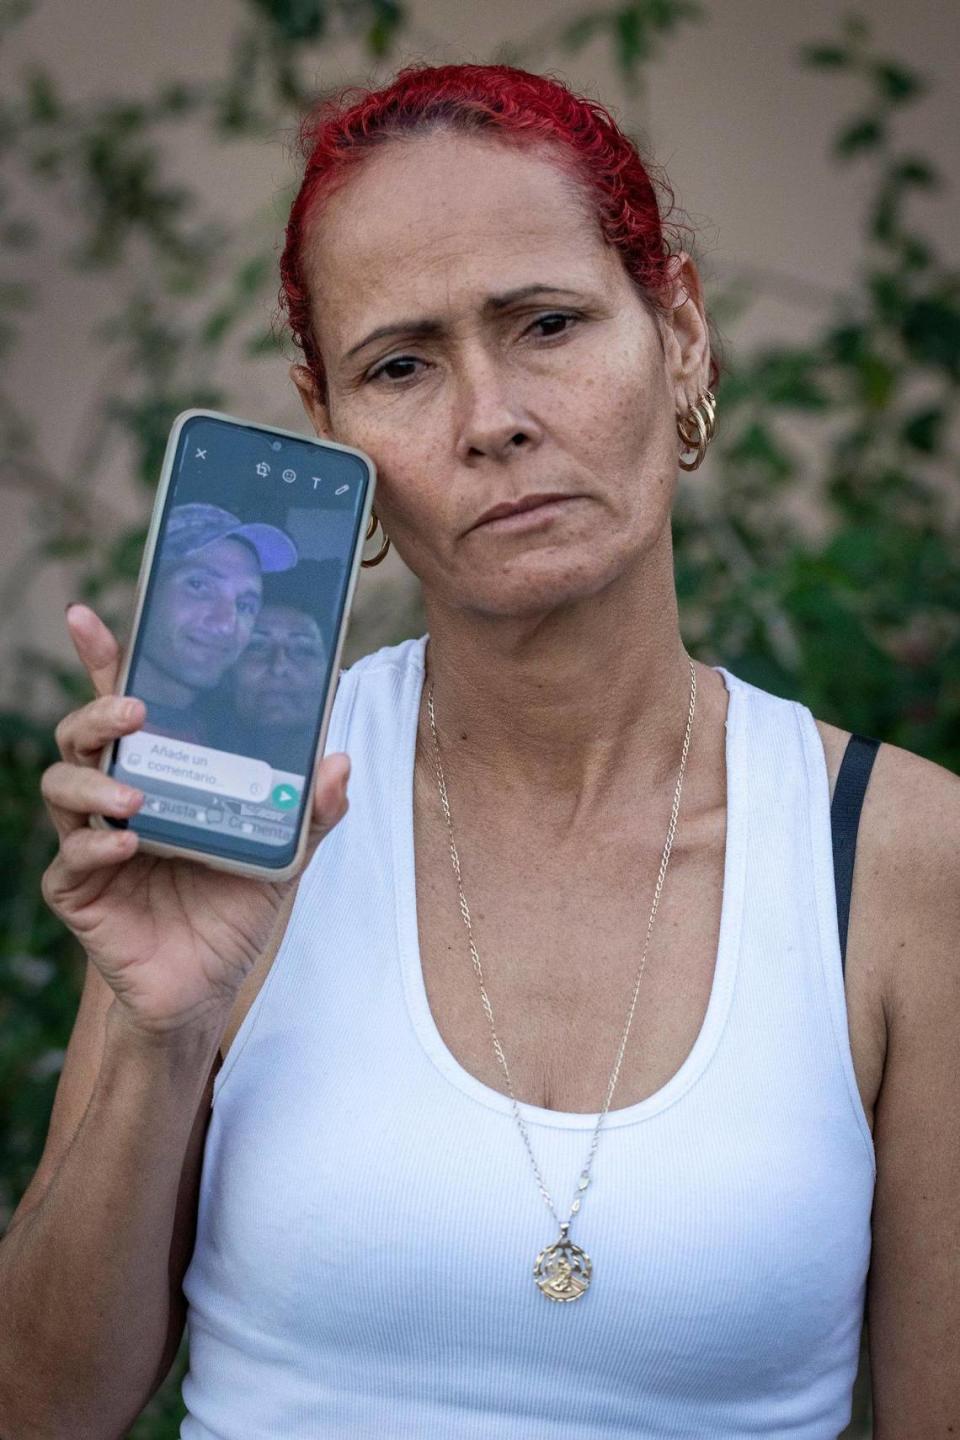 Luisa Yanes Perez, a recently arrived Cuban woman who came by boat 3 months ago, holds her cellphone with a picture of her missing sister Edelmira, and her husband Yurisnel. In late December, Edelmira and Yurisnel along with others attempted to cross the Florida Straits the same way Luisa did, but they have not been heard from since.